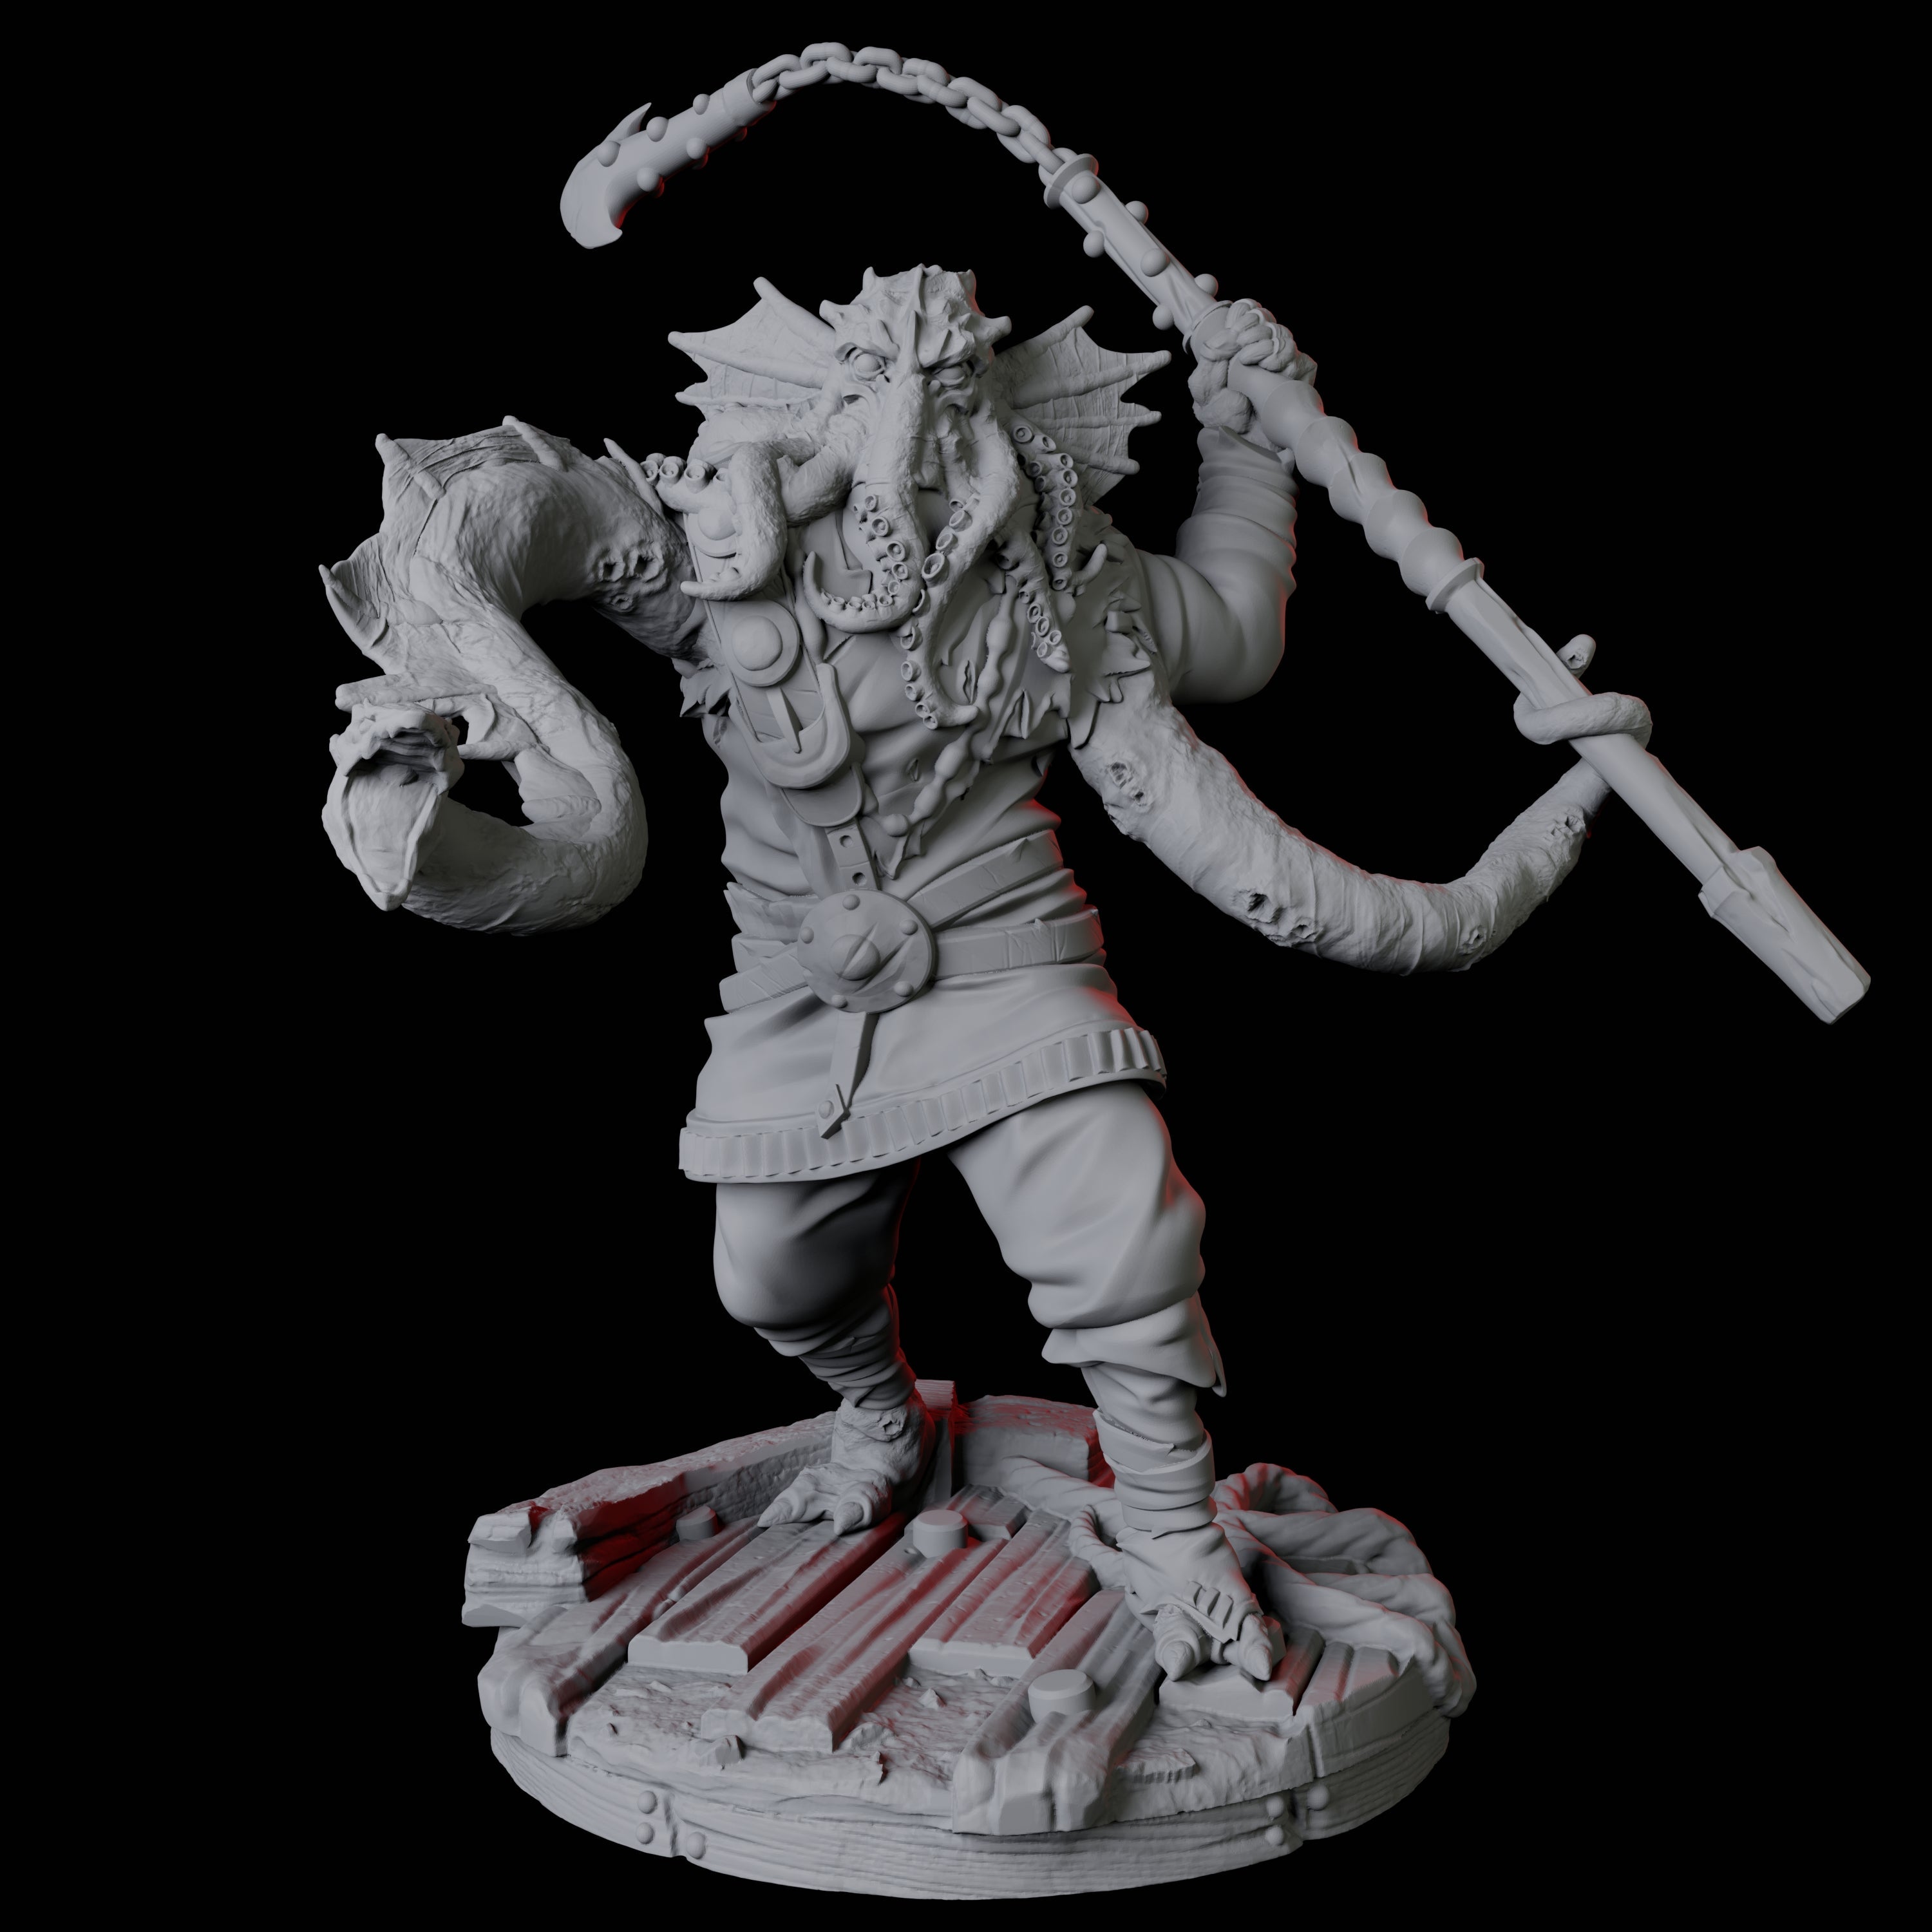 Sky Kraken Acolyte A Miniature for Dungeons and Dragons, Pathfinder or other TTRPGs